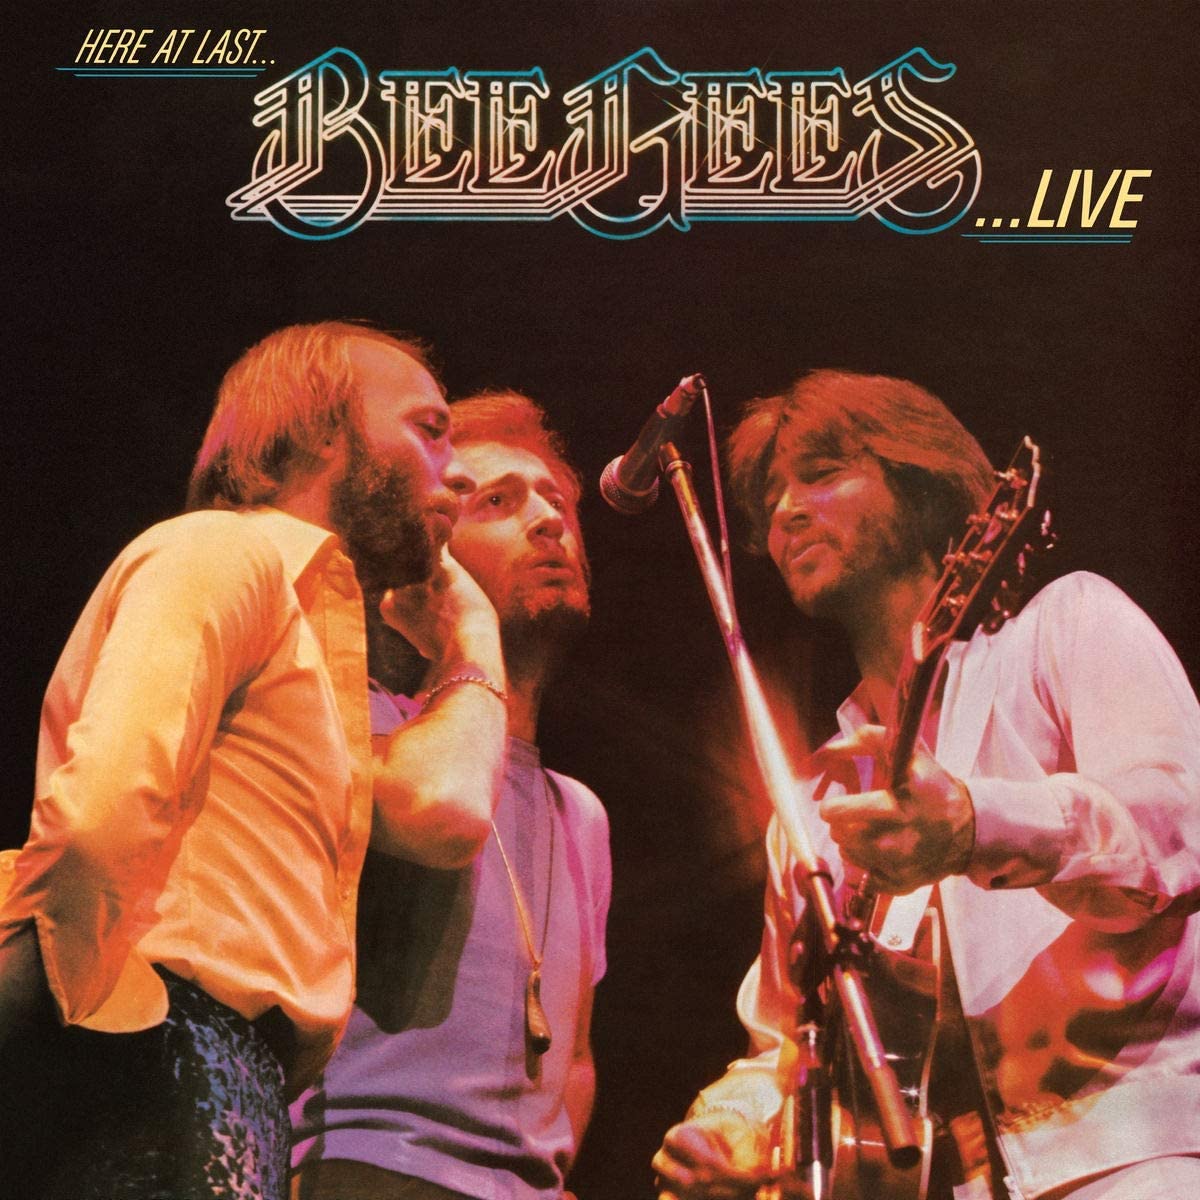 Bee Gees - Here At Last - Bee Gees Live (Capitol Records)